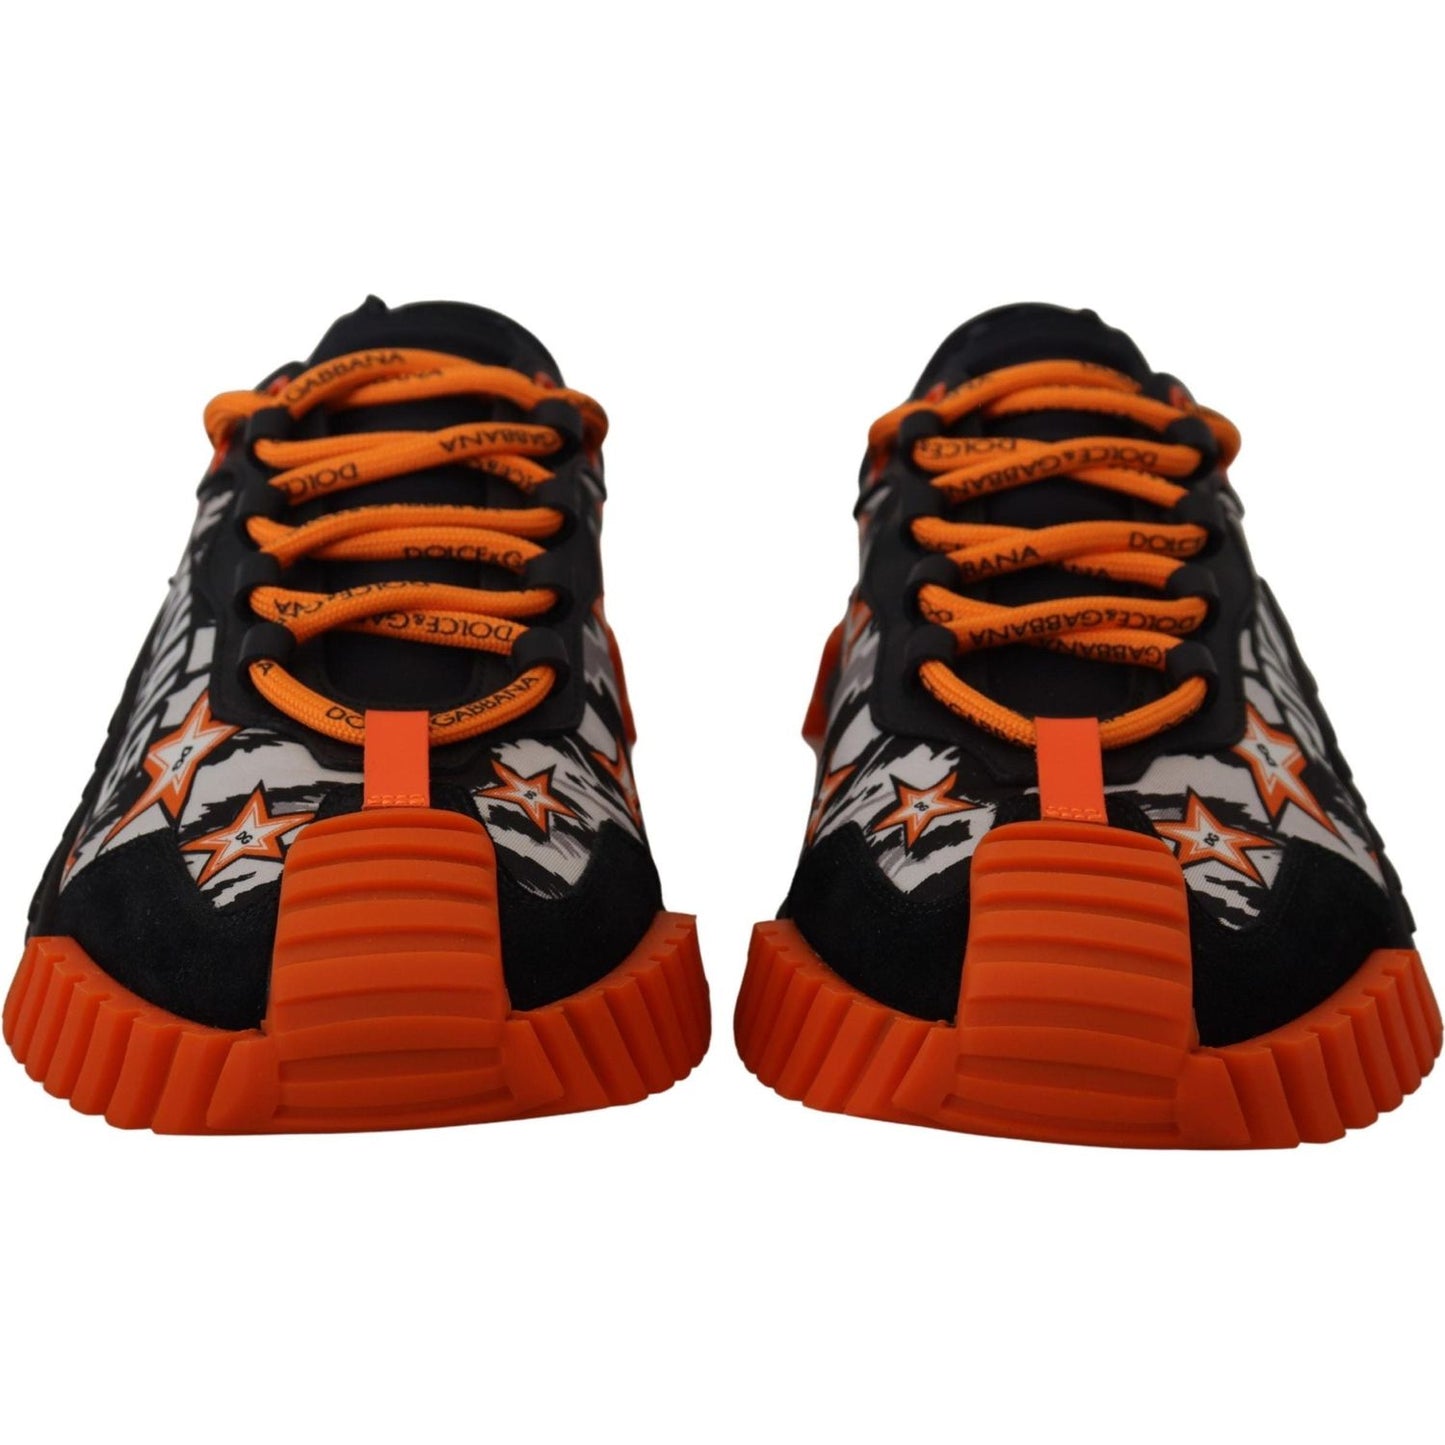 Dolce & Gabbana Elevate Your Step with Luxe Black NS1 Sneakers black-orange-fabric-lace-up-sneakers-ns1-shoes